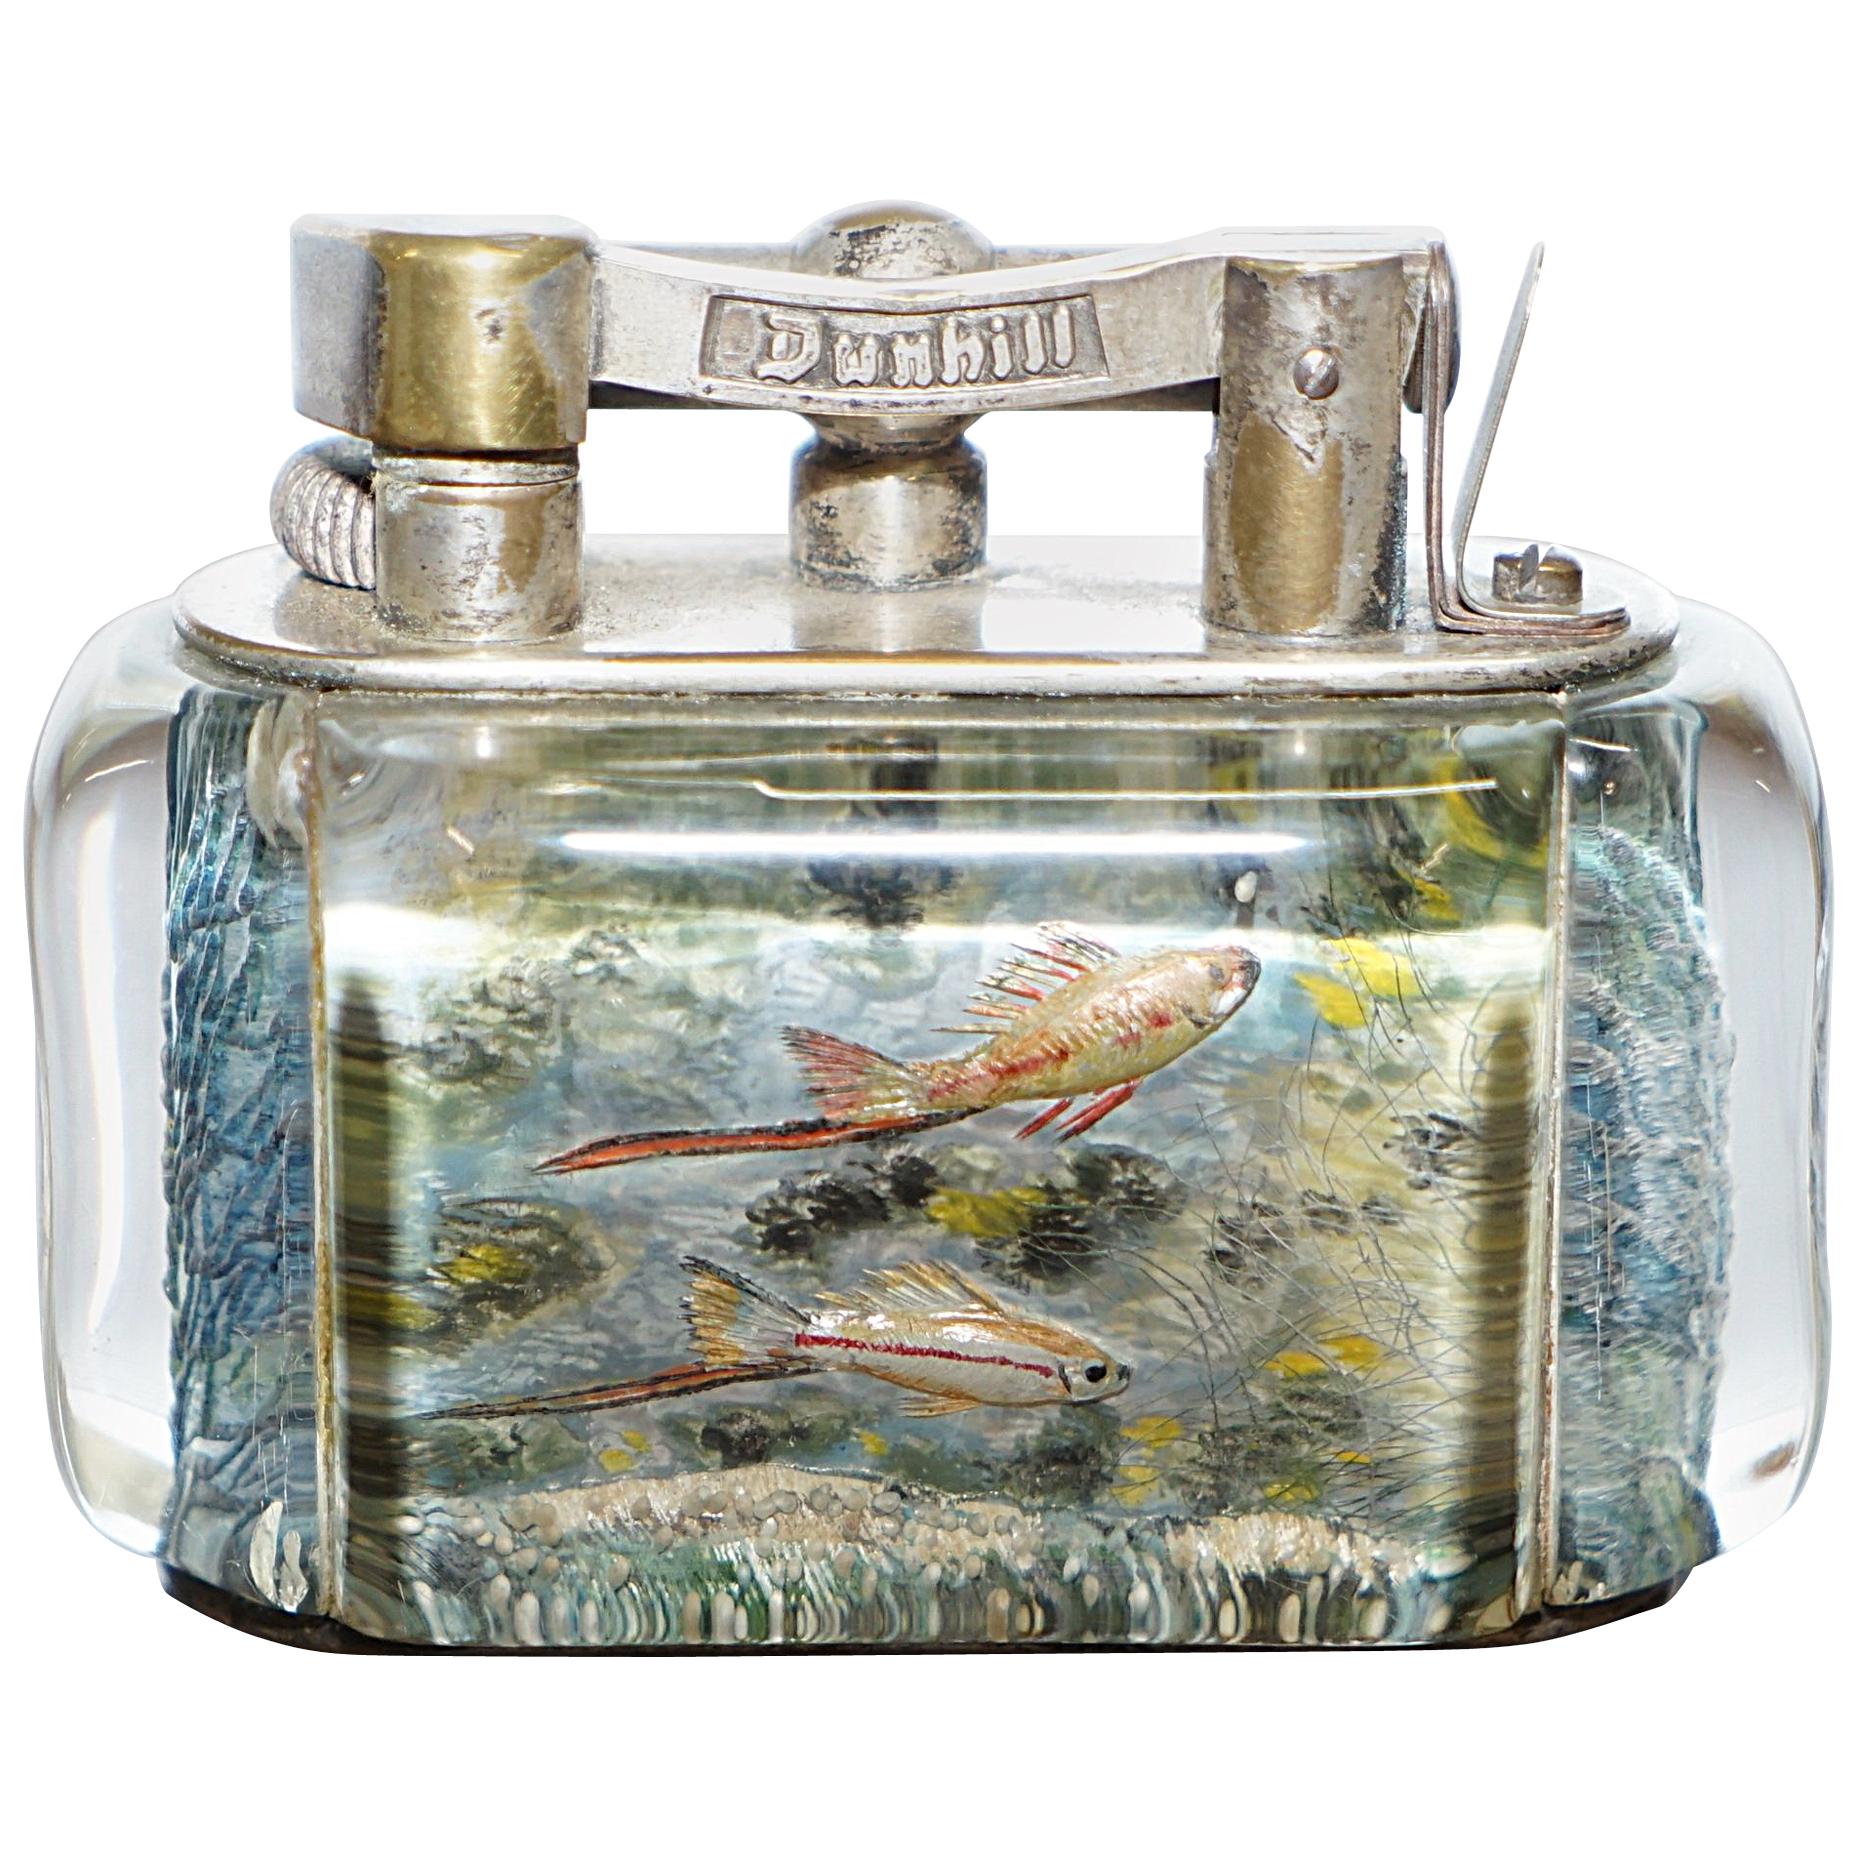 1950s Dunhill Aquarium Oversized Table Lighter Made in England Chrome Deep Sea